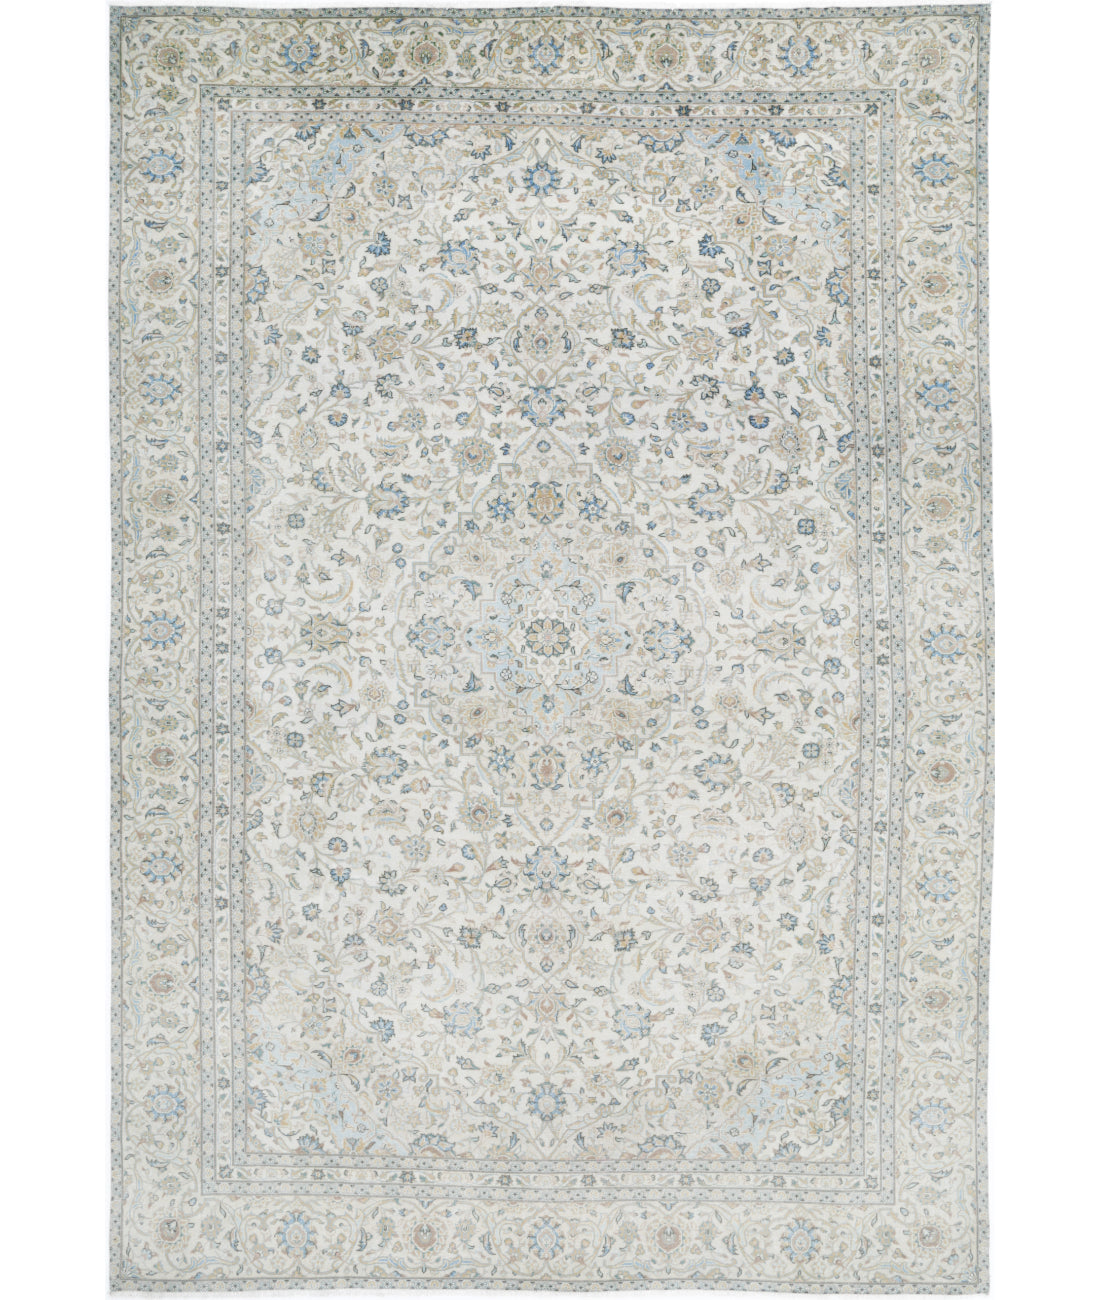 Hand Knotted Vintage Persian Kashan Wool Rug - 8'7'' x 12'7'' 8'7'' x 12'7'' (258 X 378) / Ivory / Blue